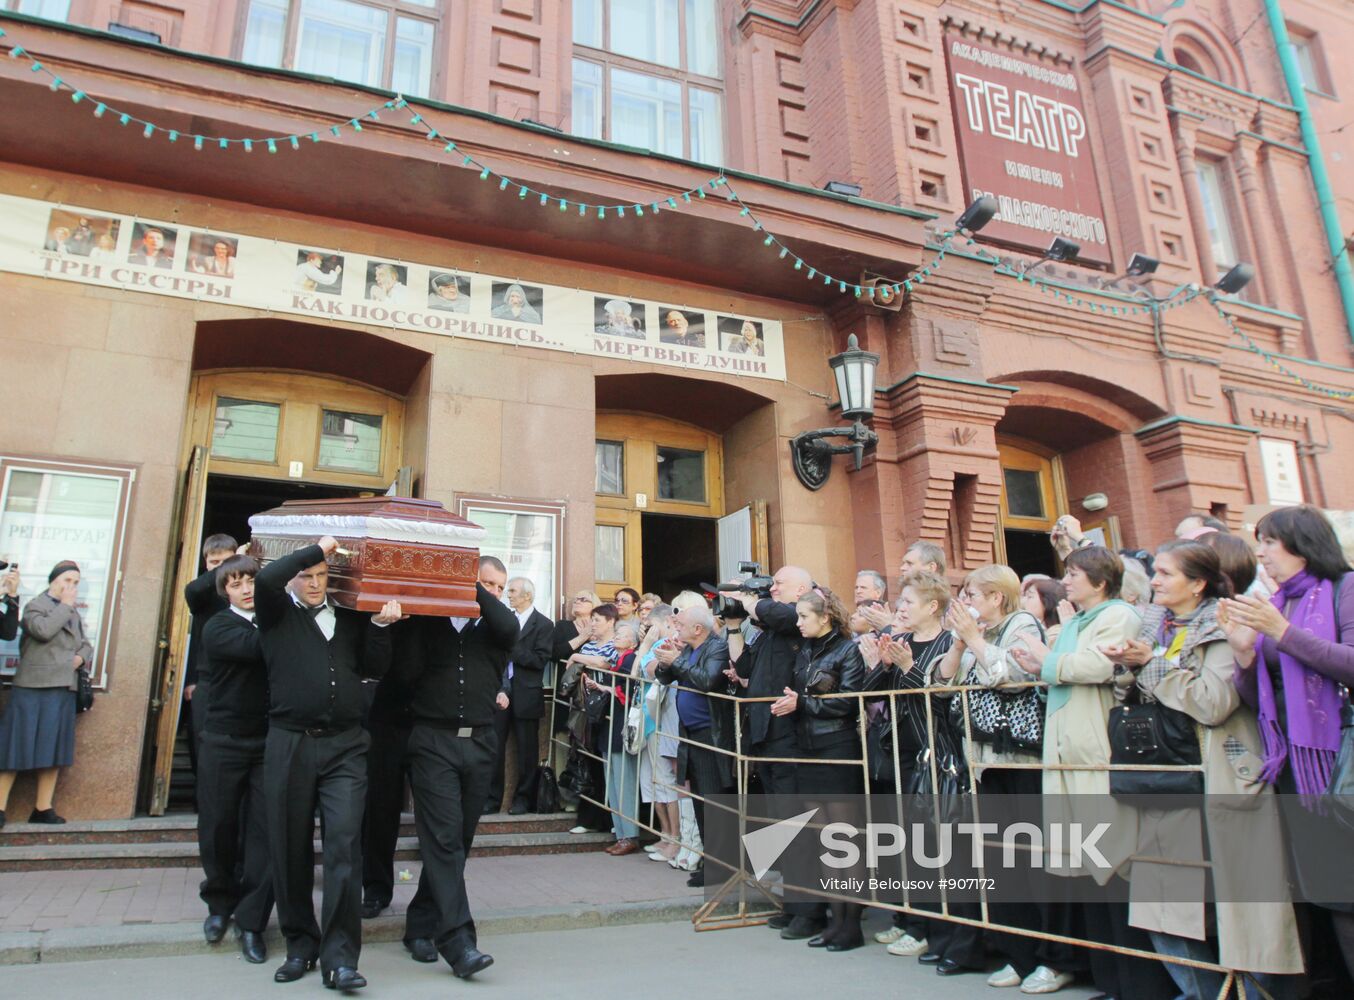 Funeral service for People's Artist of Russia Alexander Lazarev